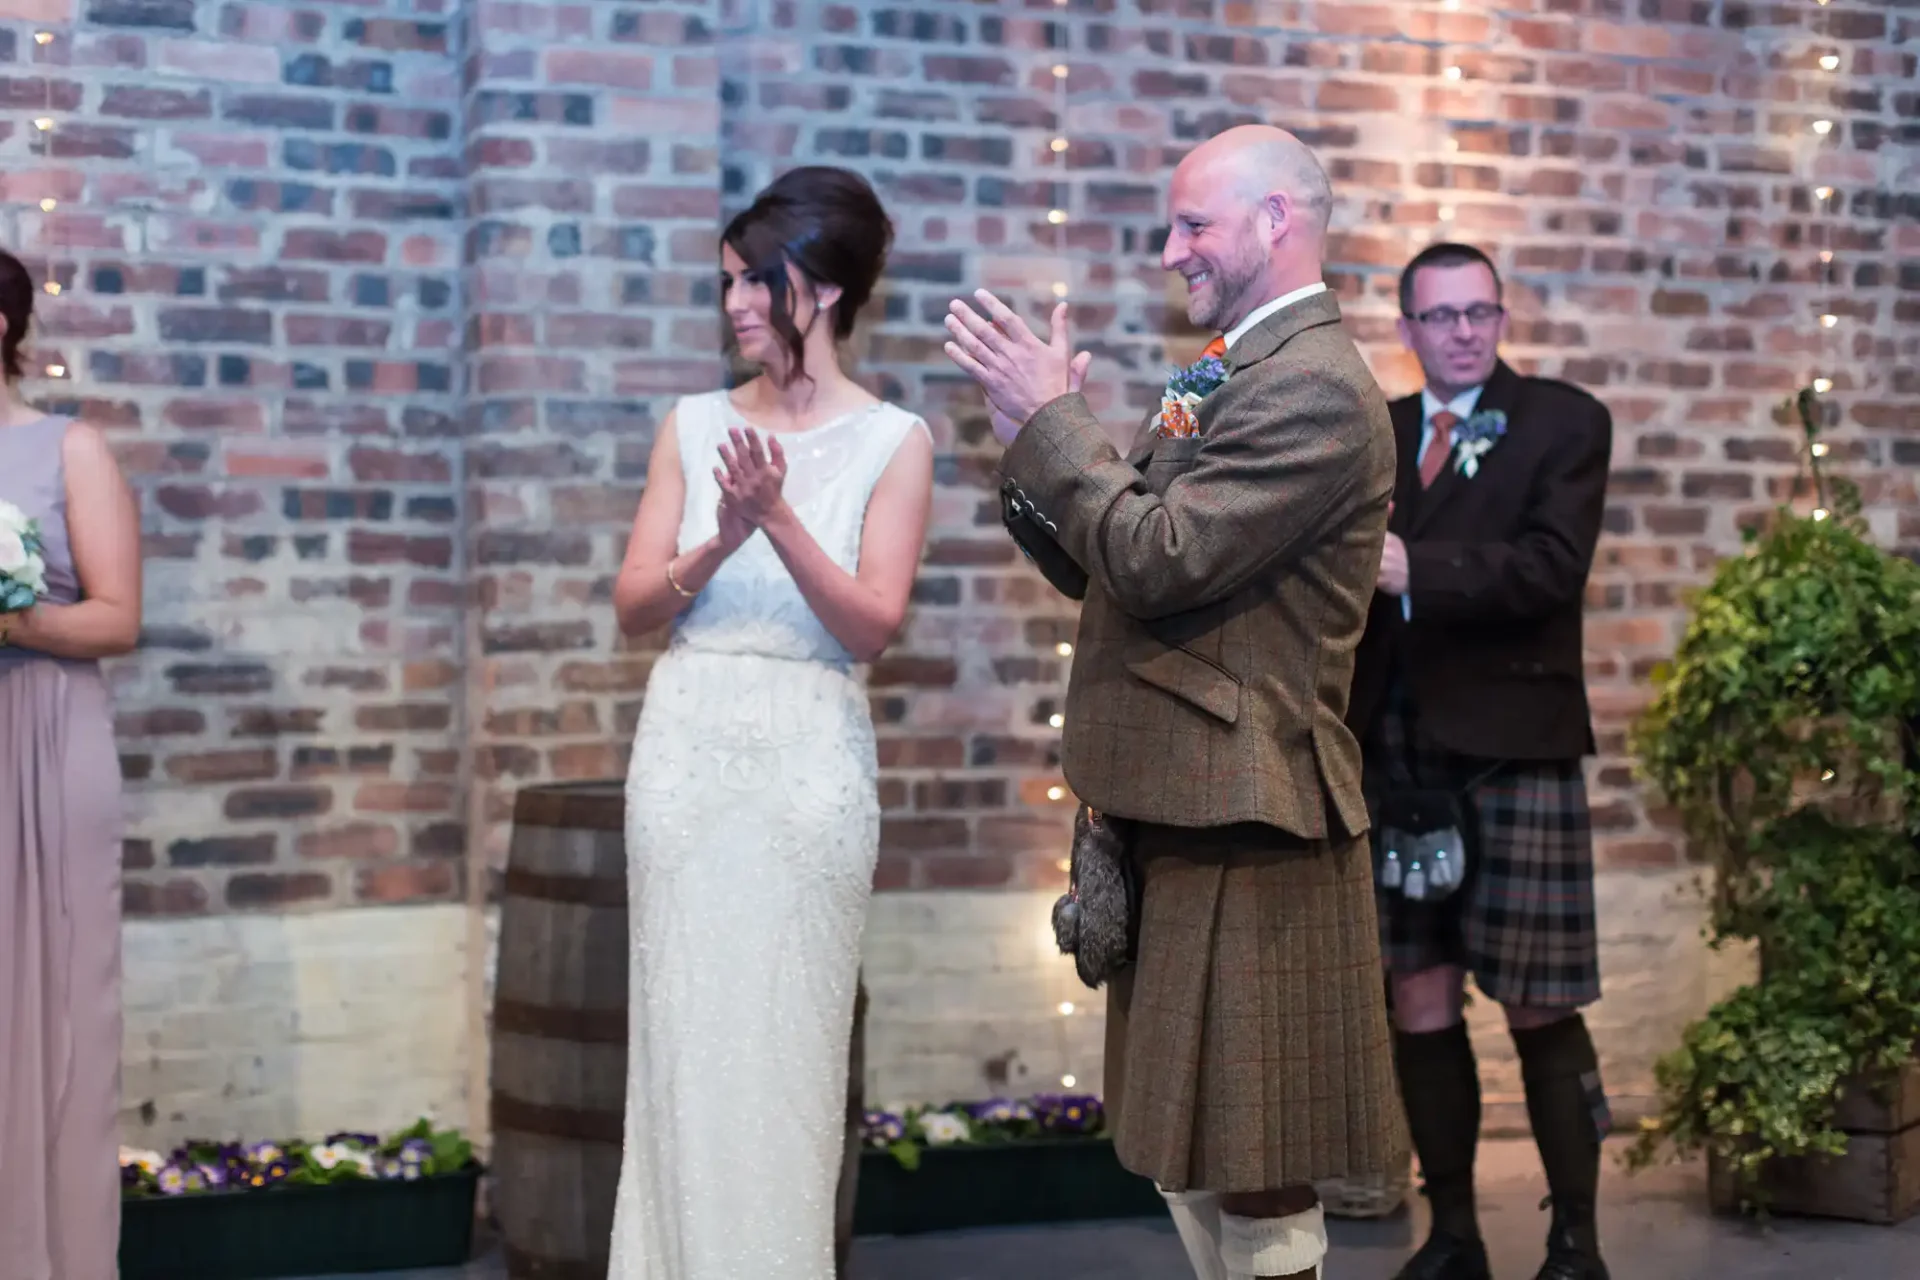 A bride and groom applauding, with the groom wearing a kilt, standing in front of a brick wall at an indoor wedding venue. a best man is visible in the background.